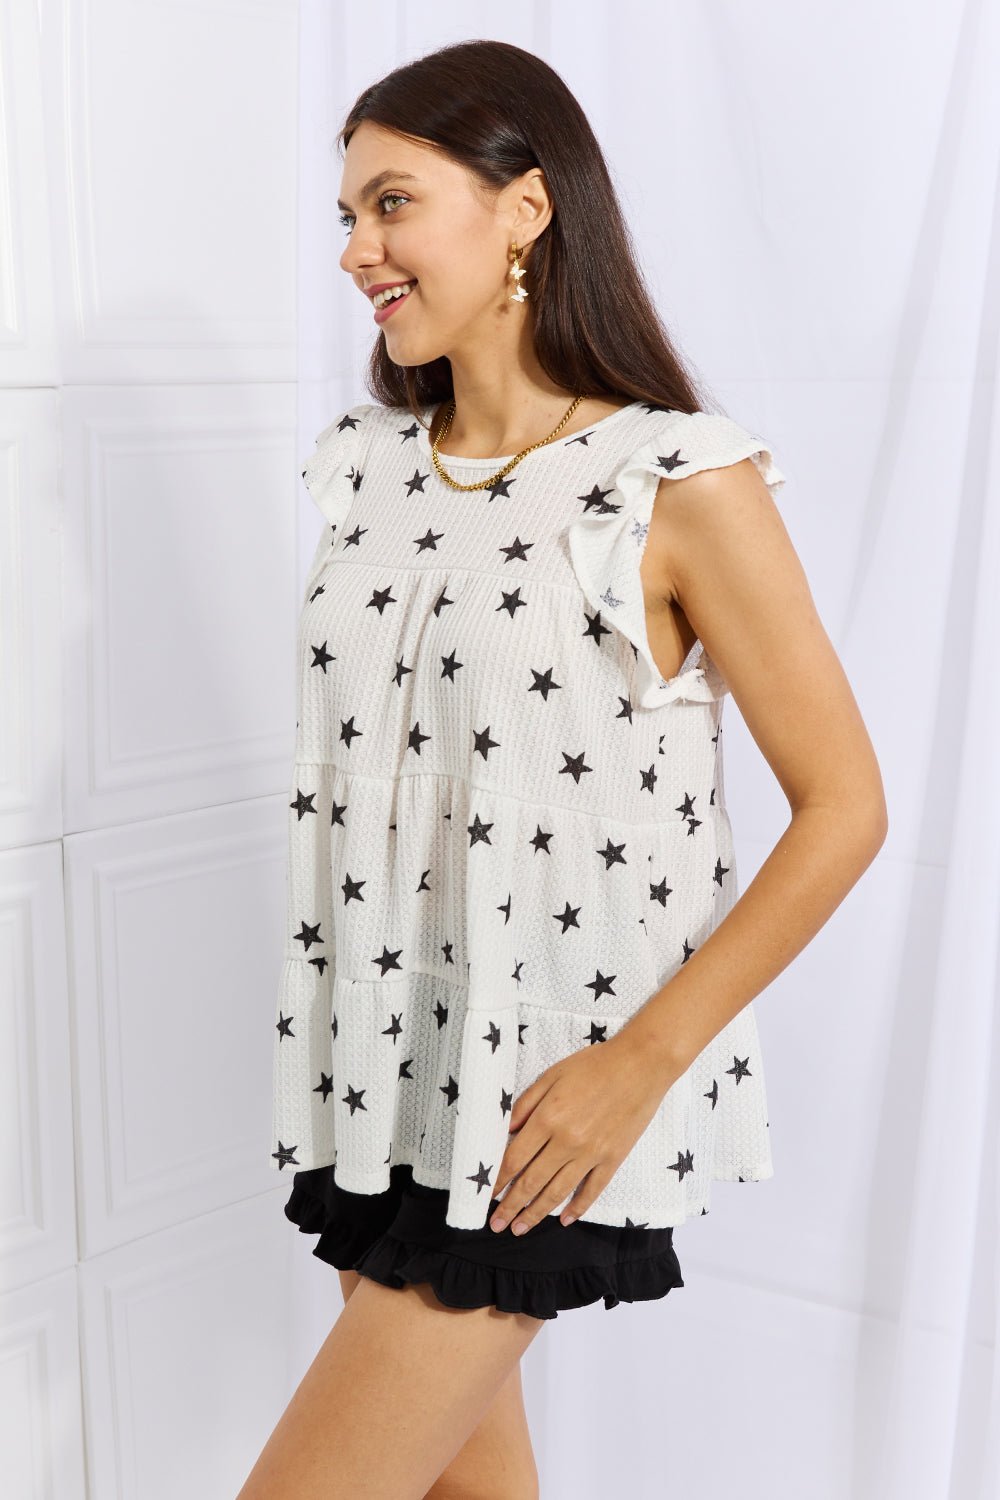 Butterfly Sleeve Star Print Top in WhiteTopHeimish